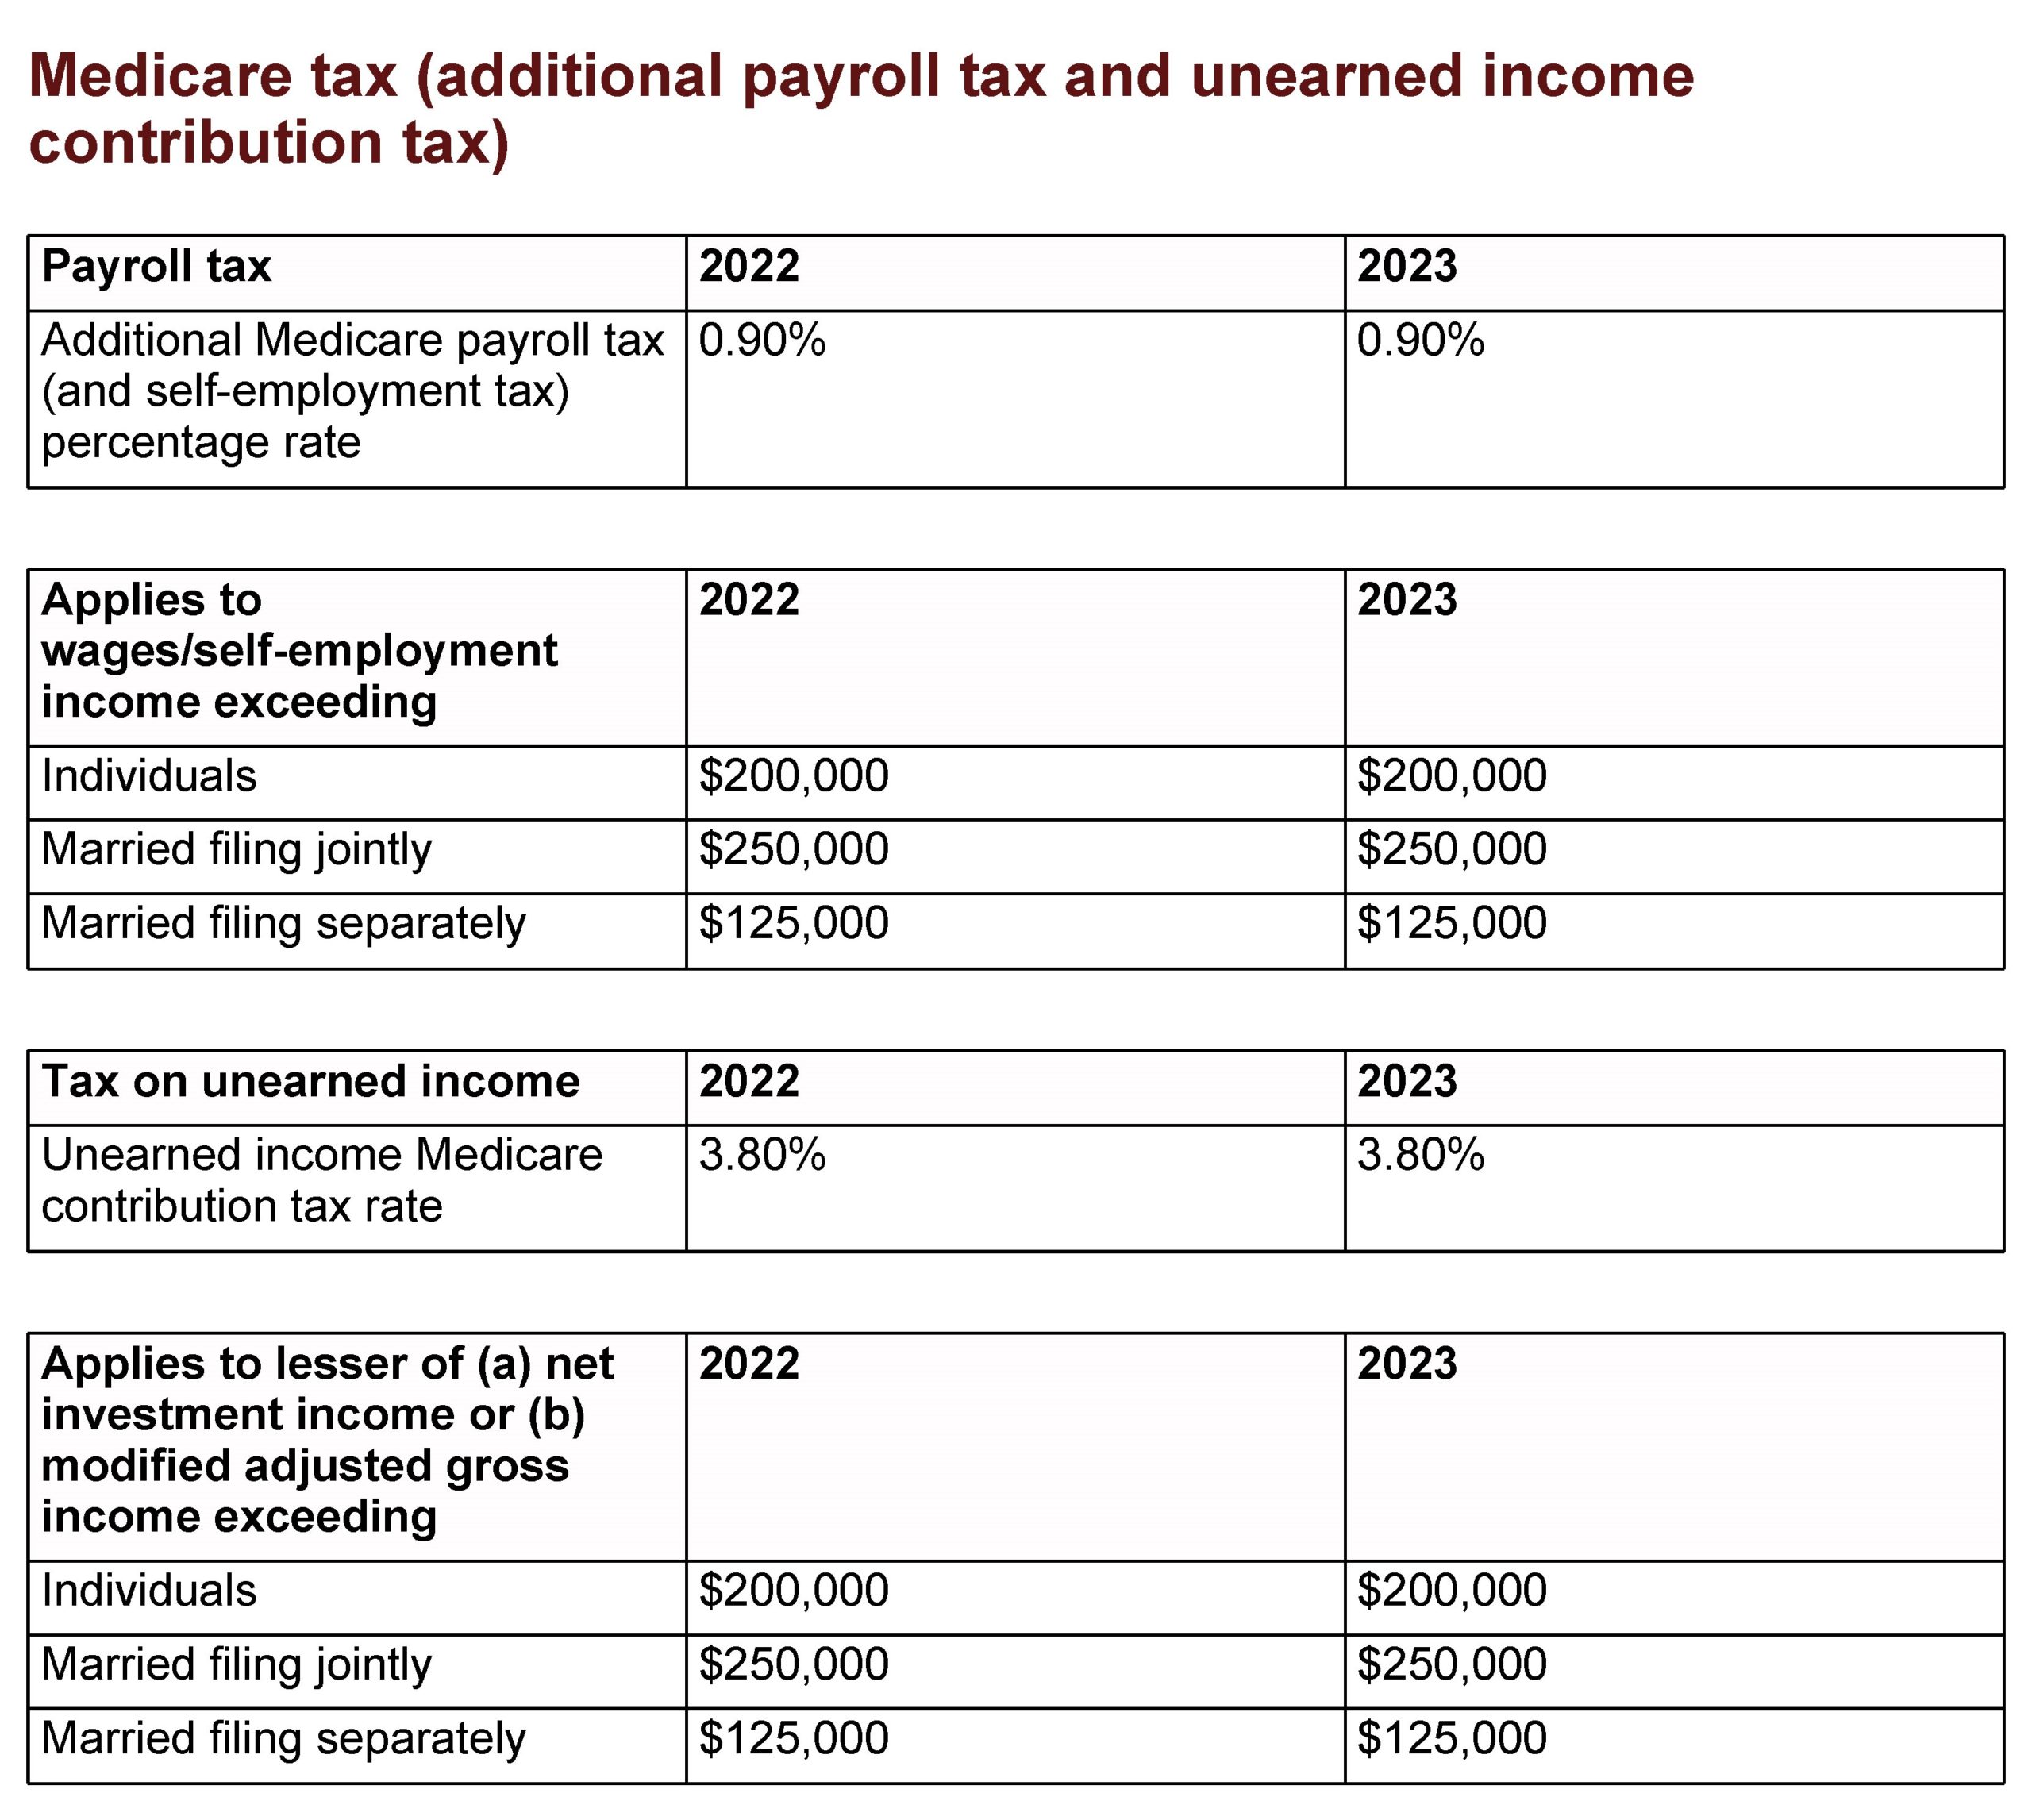 Medicare tax (additional payroll tax and unearned income contribution tax)